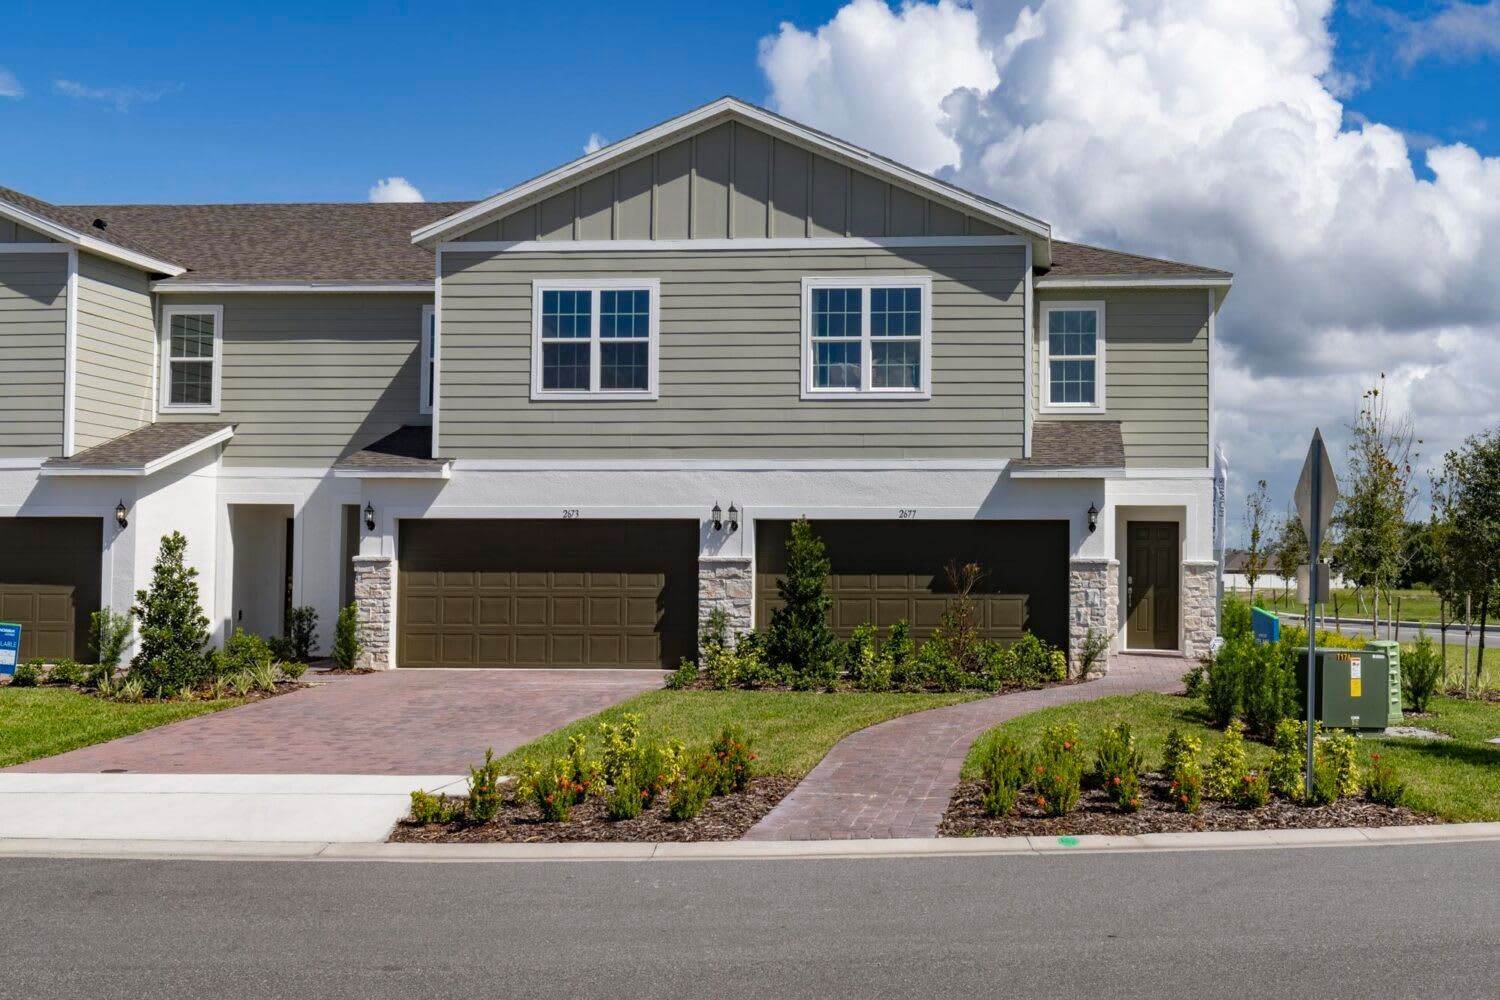 Townhomes at Sky Lakes Estates building at Michigan Ave (Behind St. Cloud High School), St. Cloud, FL 34769